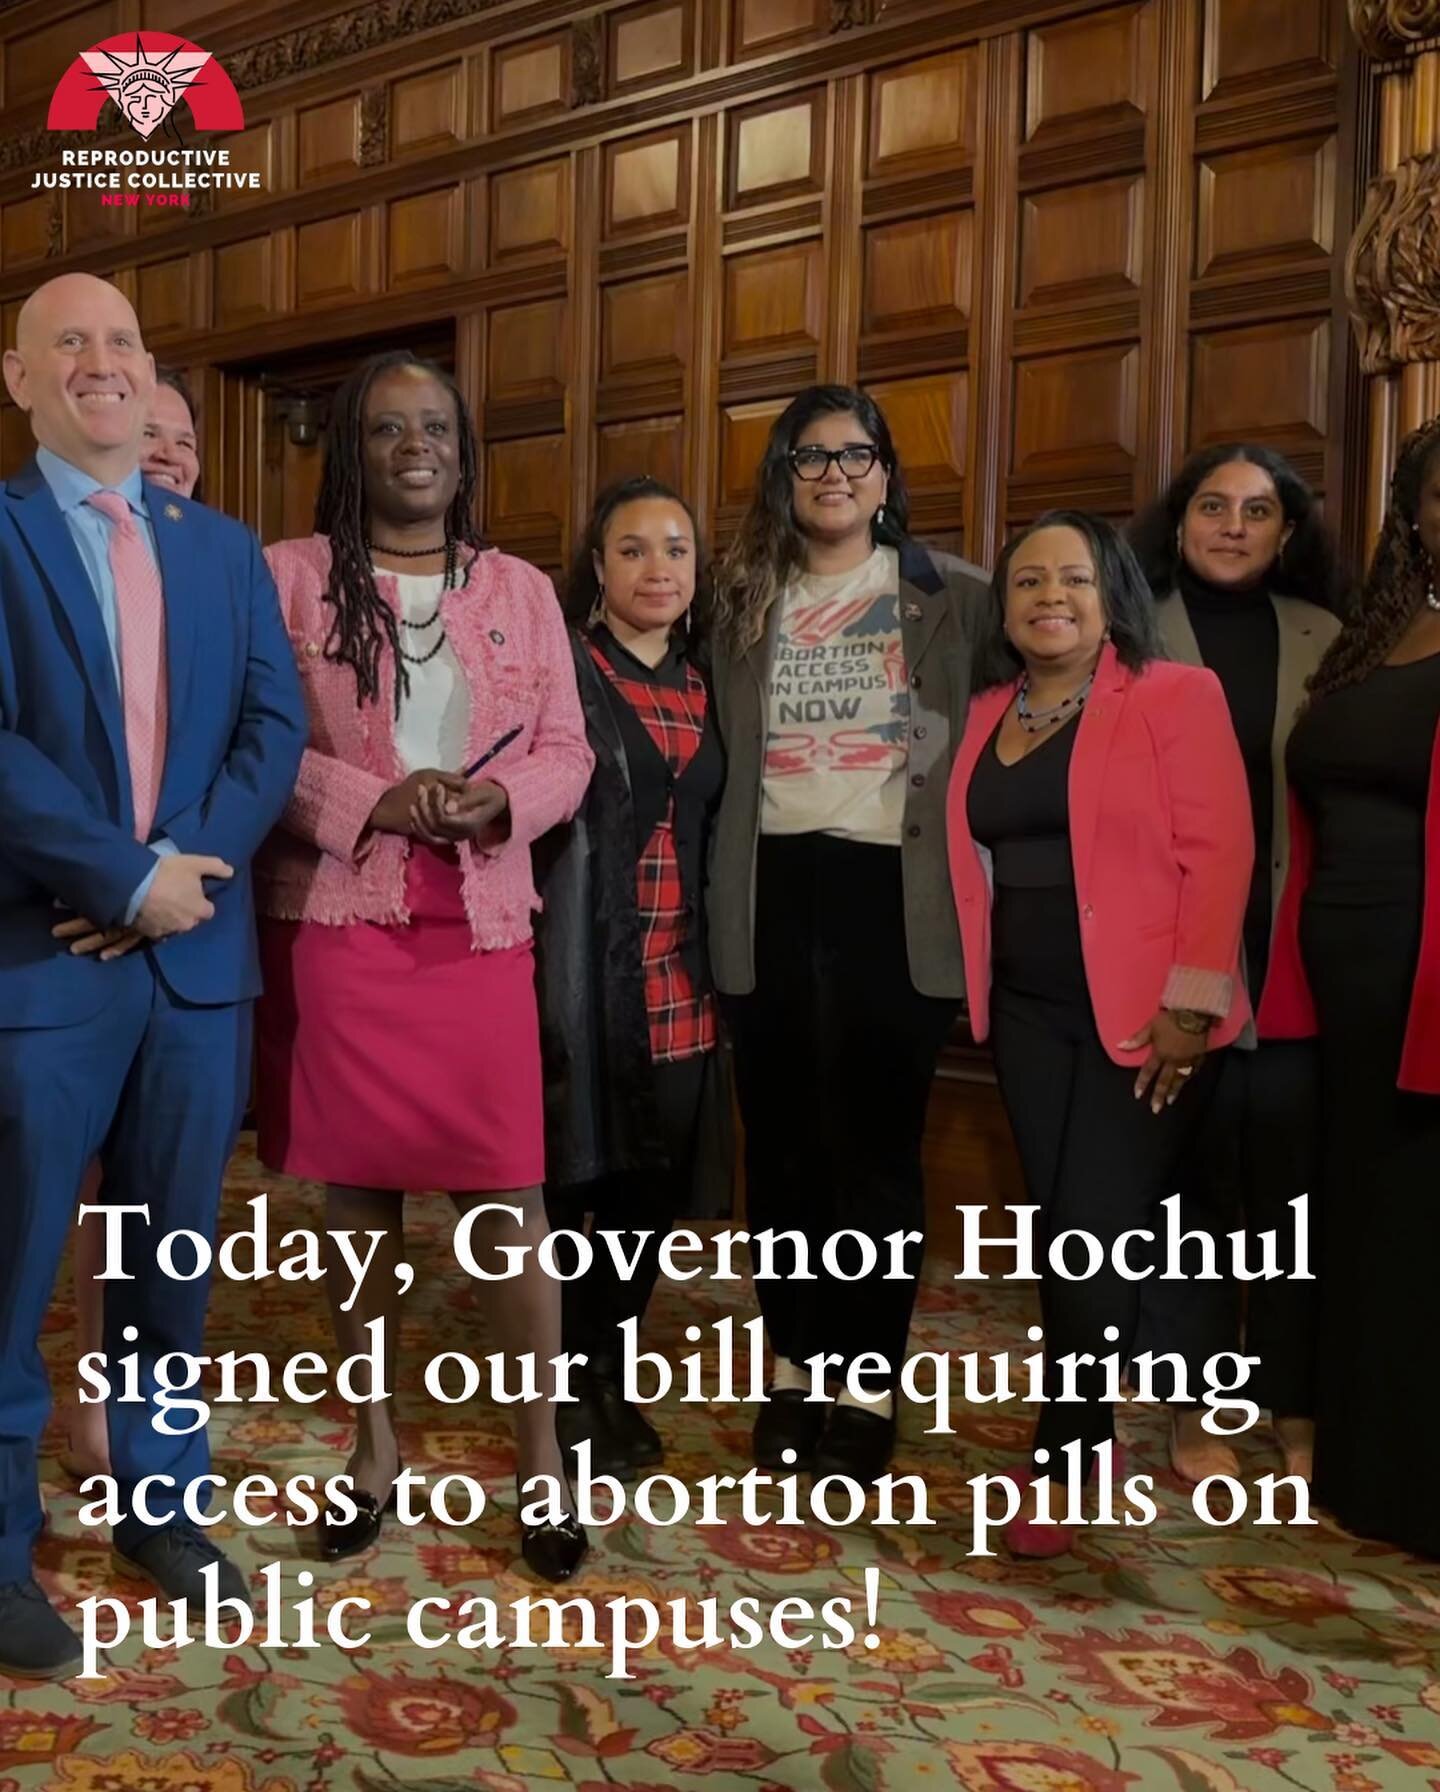 VICTORY! We went up to Albany today for the signing of our medication abortion access on campus bill!!! It was especially emotional given that this was the one year anniversary of the leak of the opinion overturning Roe v Wade. We&rsquo;re so proud t